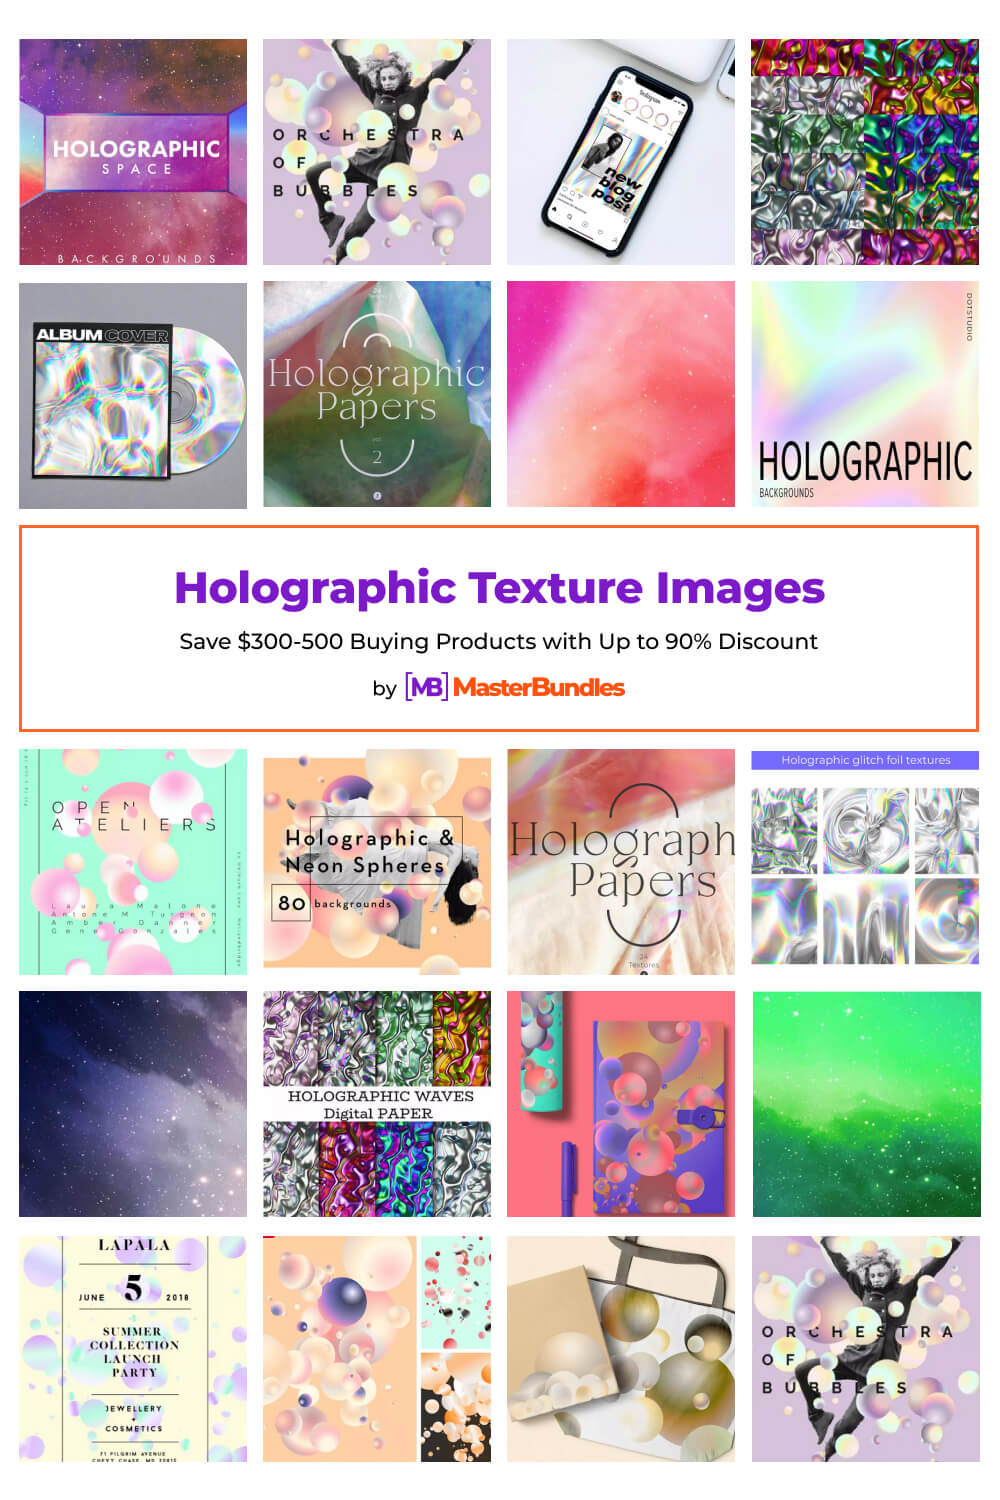 holographic texture images pinterest image.